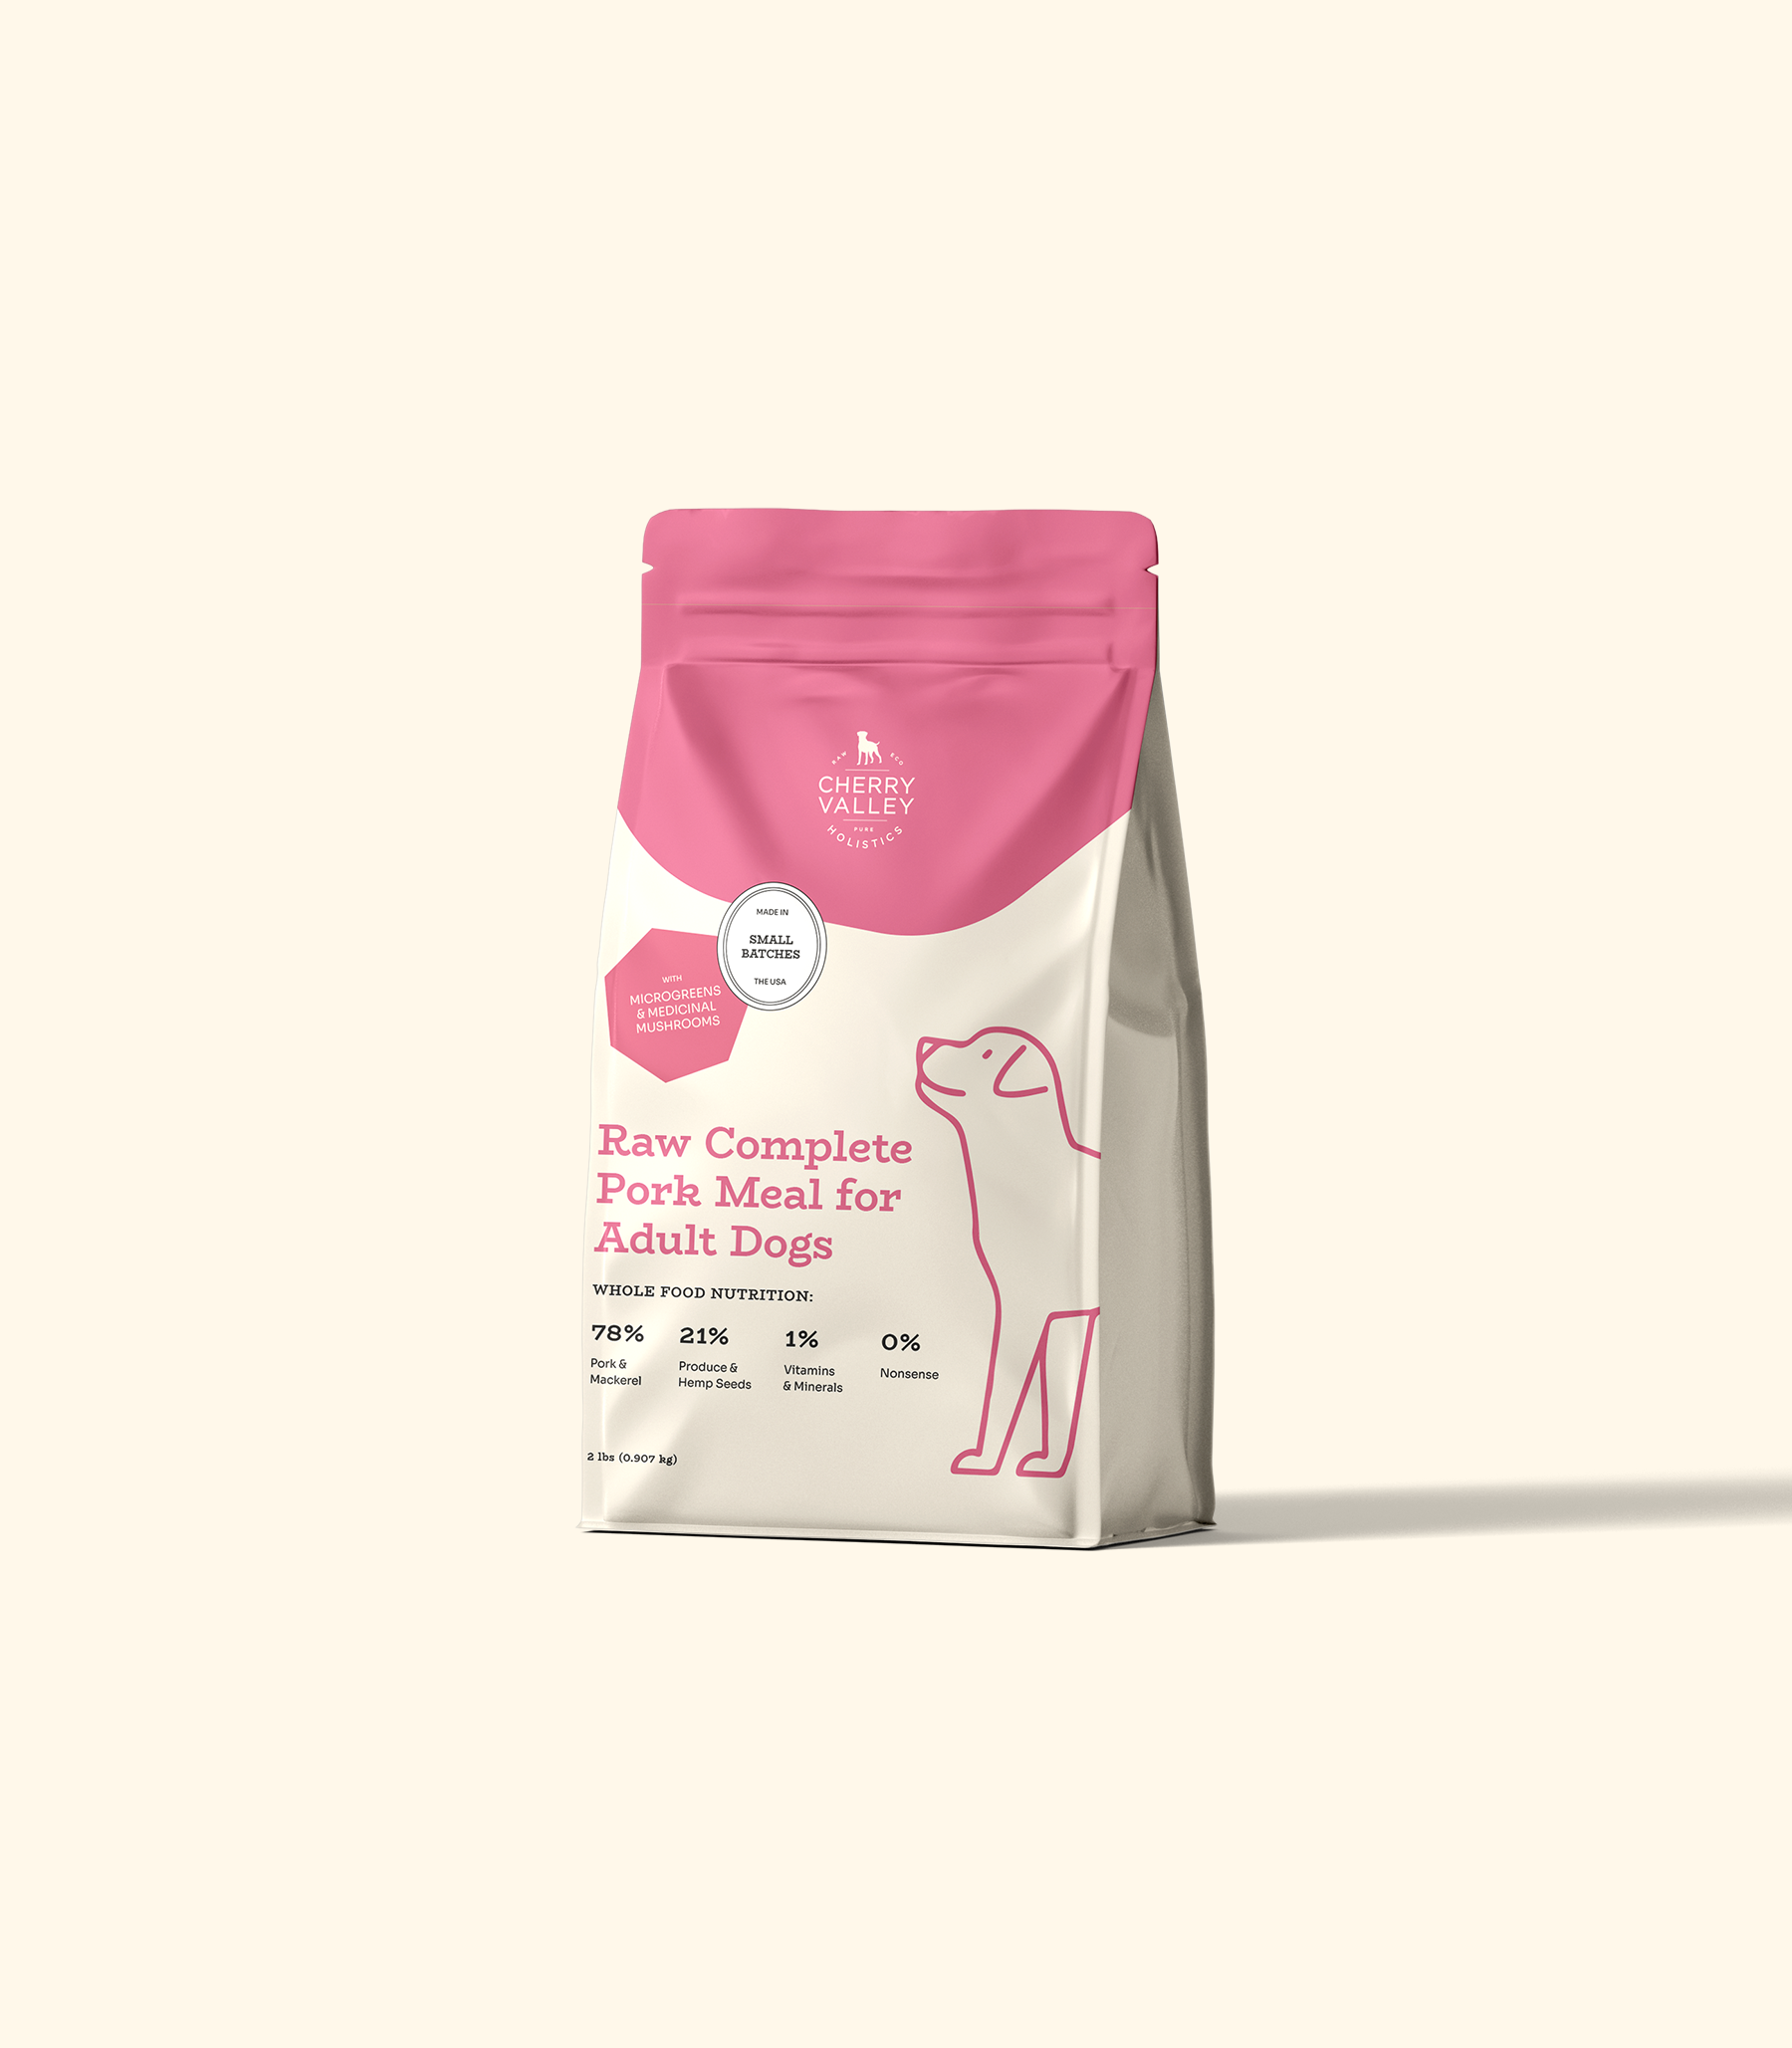 Raw Complete Pork Meal for Adult Dogs